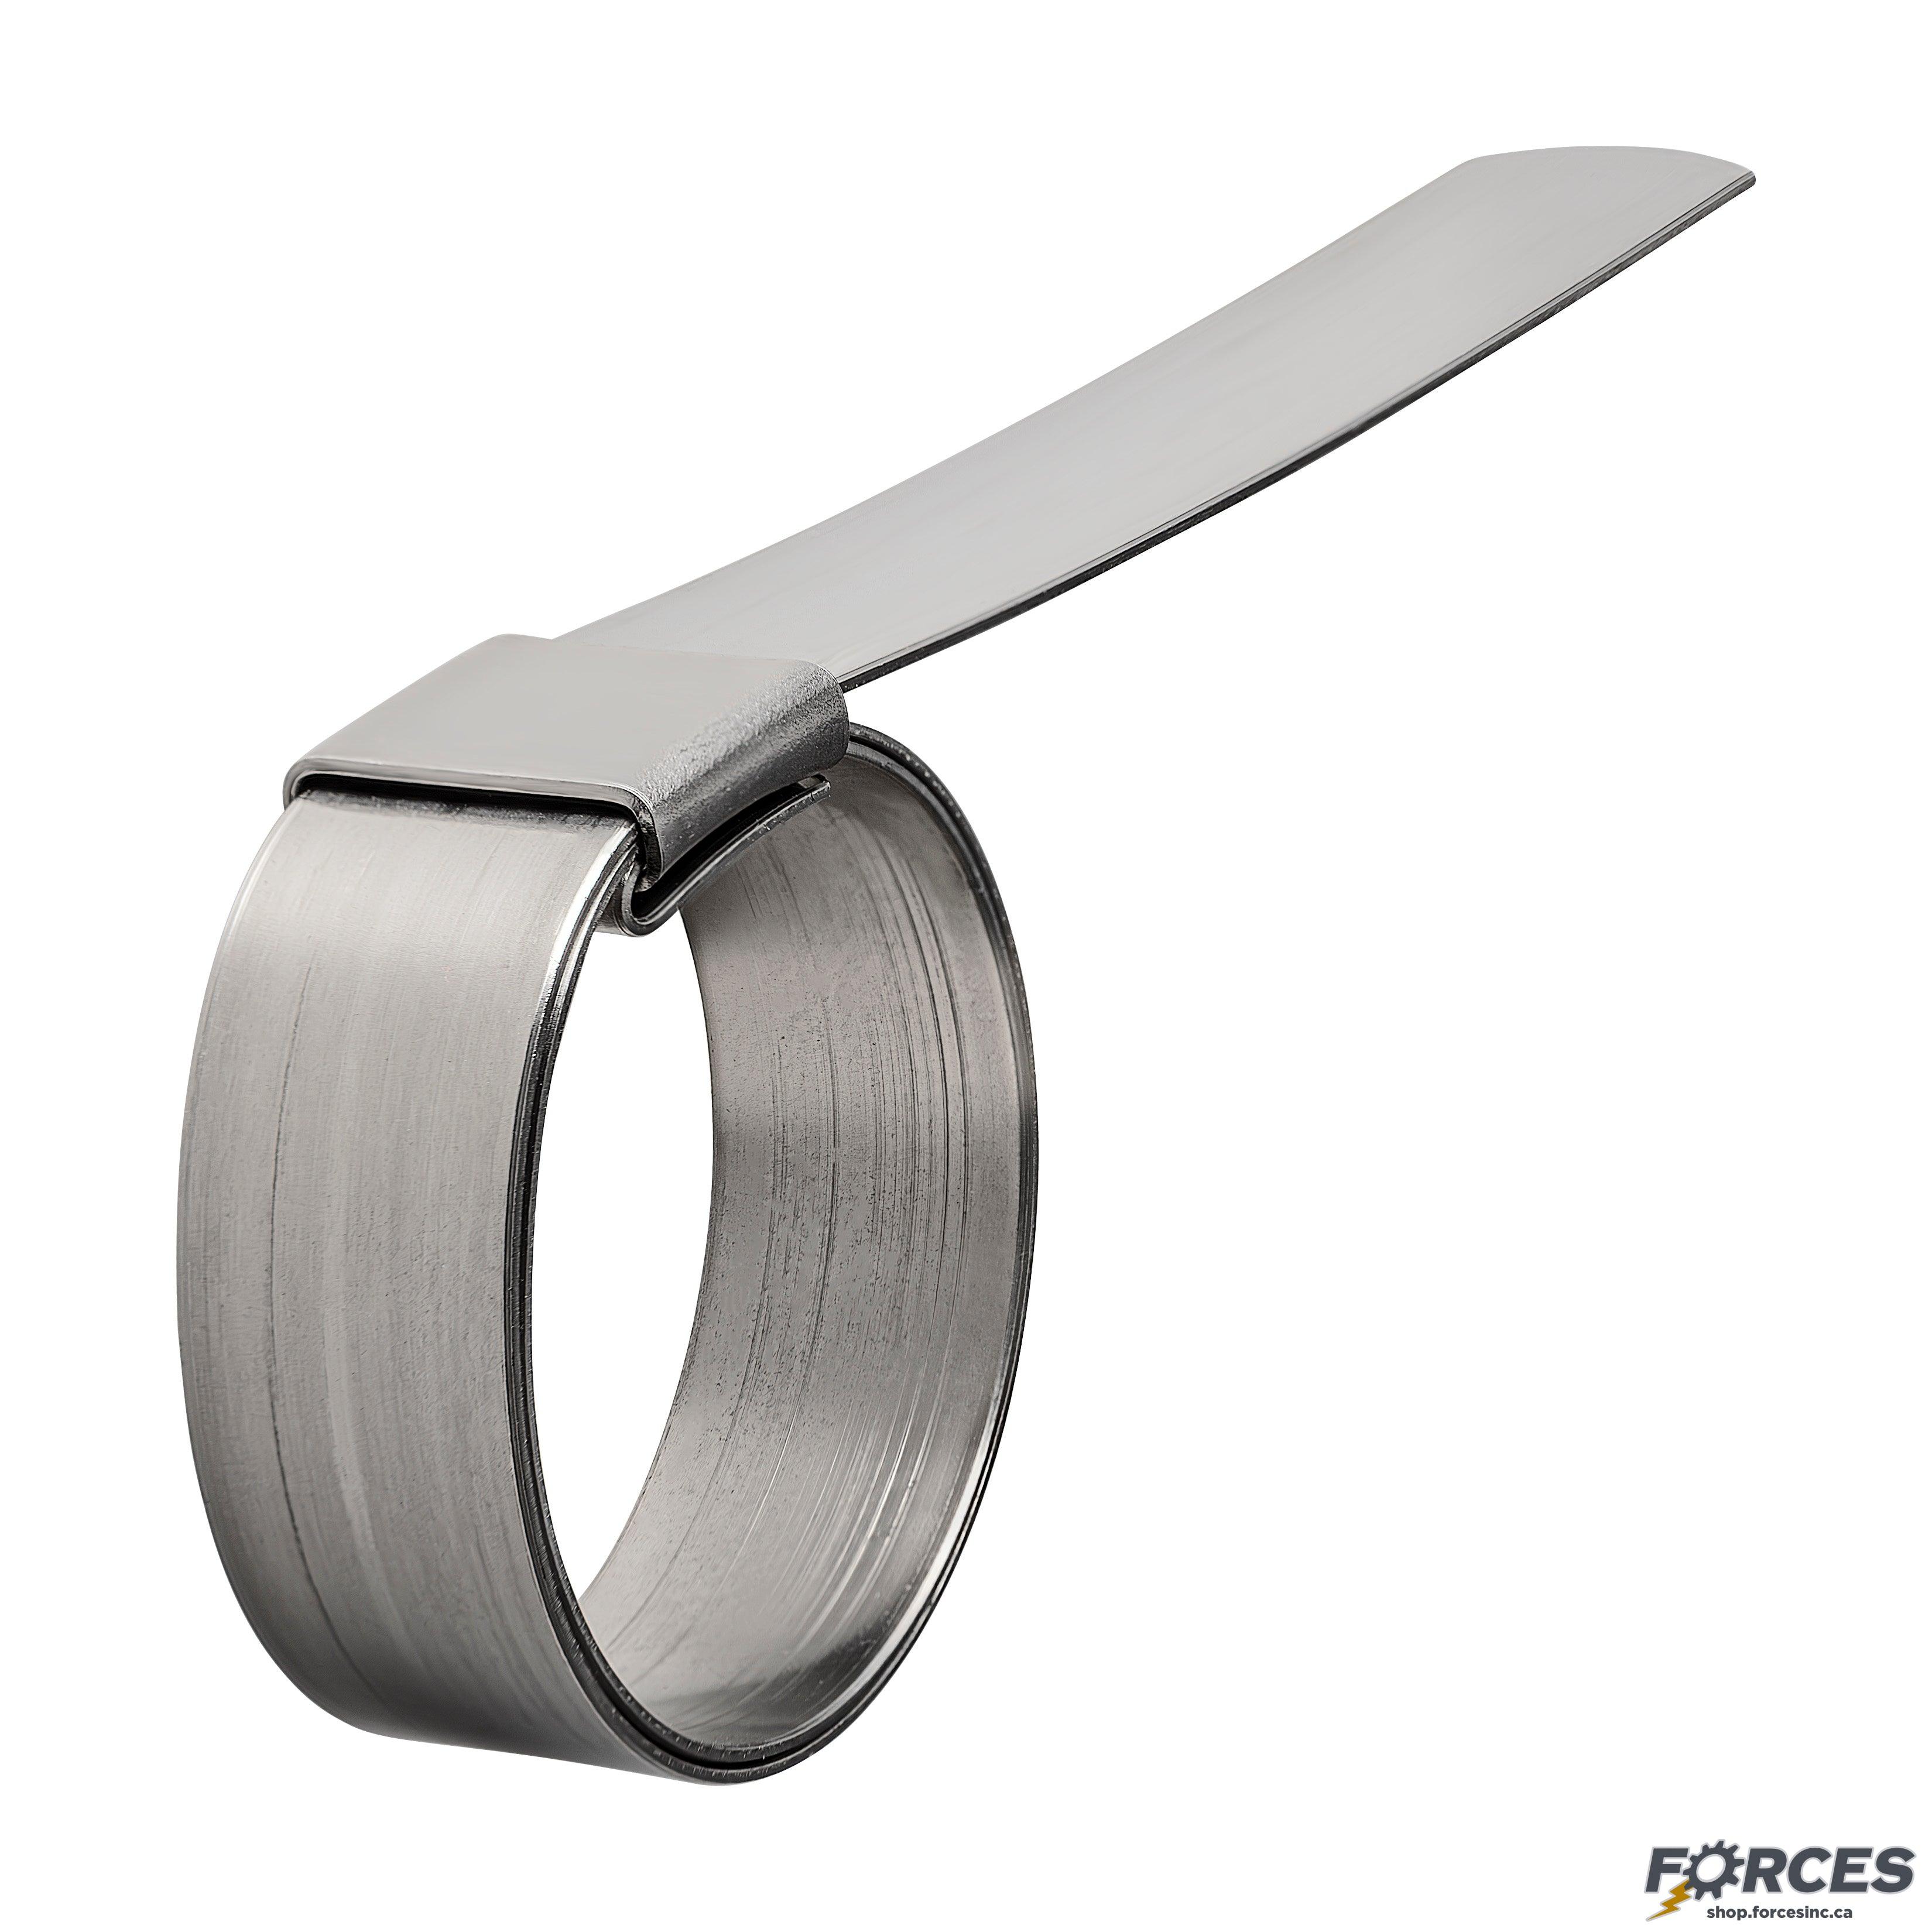 2" Center Punch Band Clamp - Stainless Steel 304 - Forces Inc